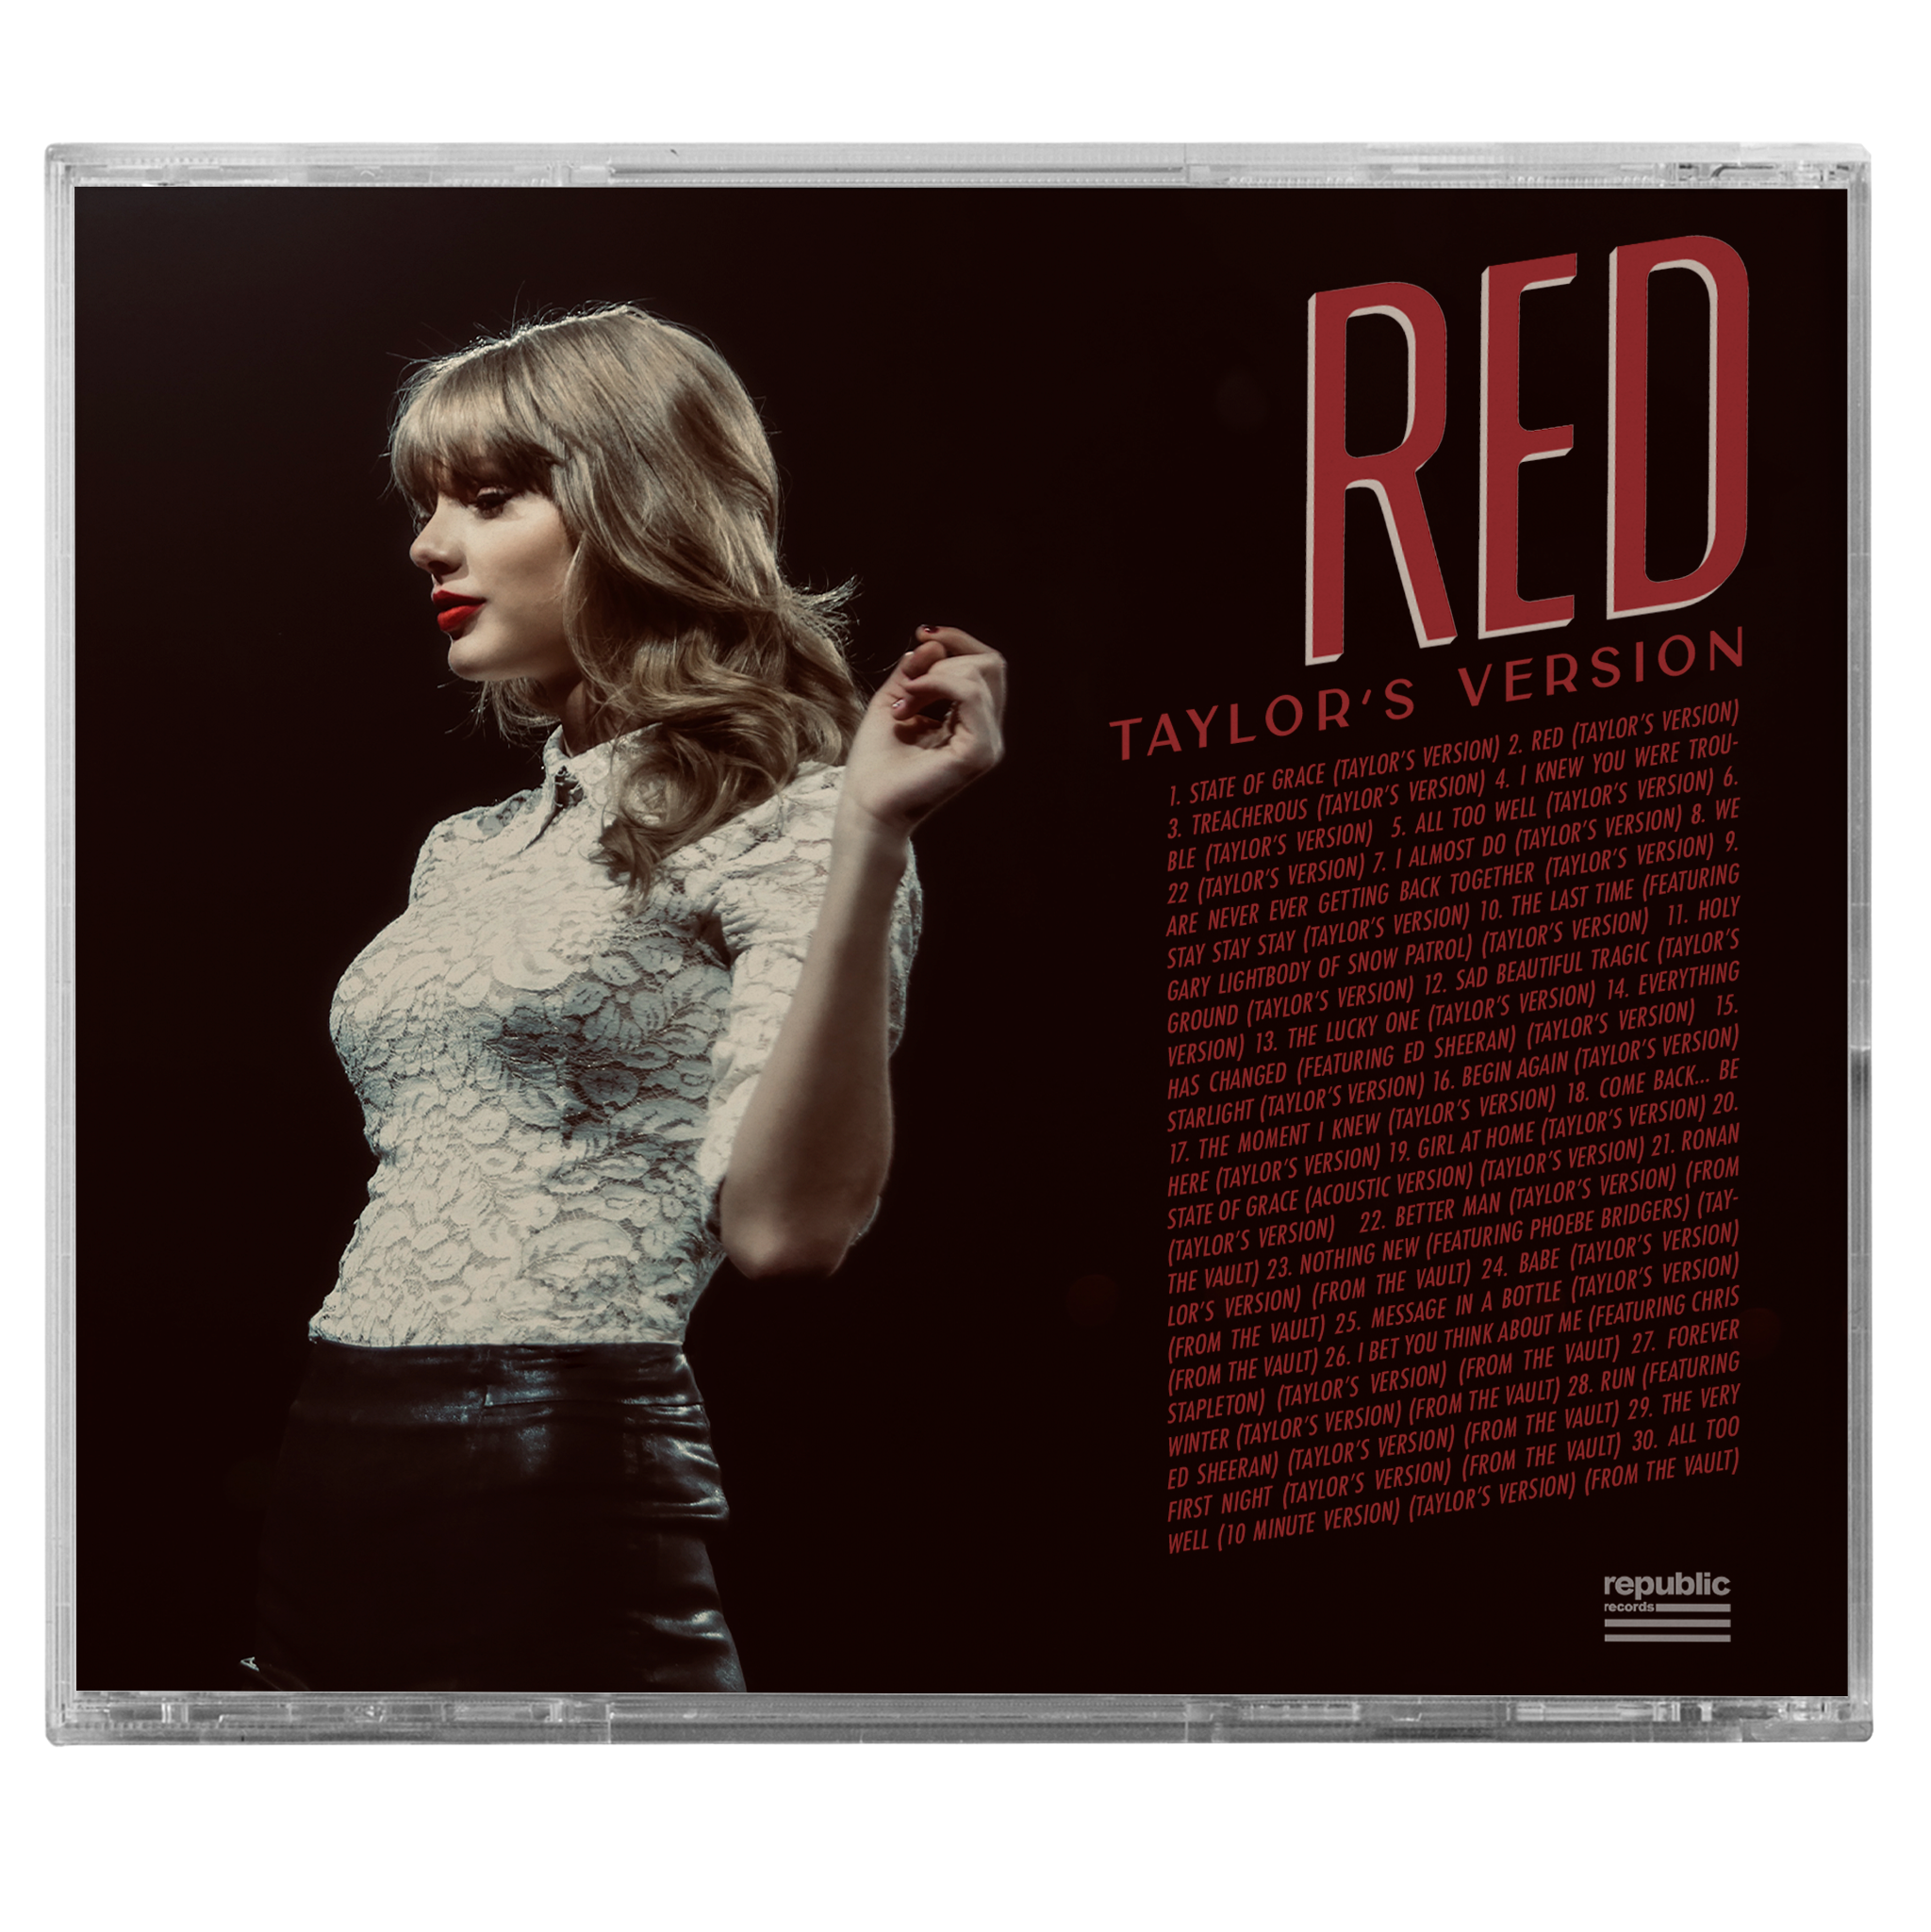 RED (Taylor's Version) CD each CD album features: 30 songs, including 9 songs from the Vault, exclusive album booklet with never before seen photos, artwork and lyrics for the 9 songs from the Vault